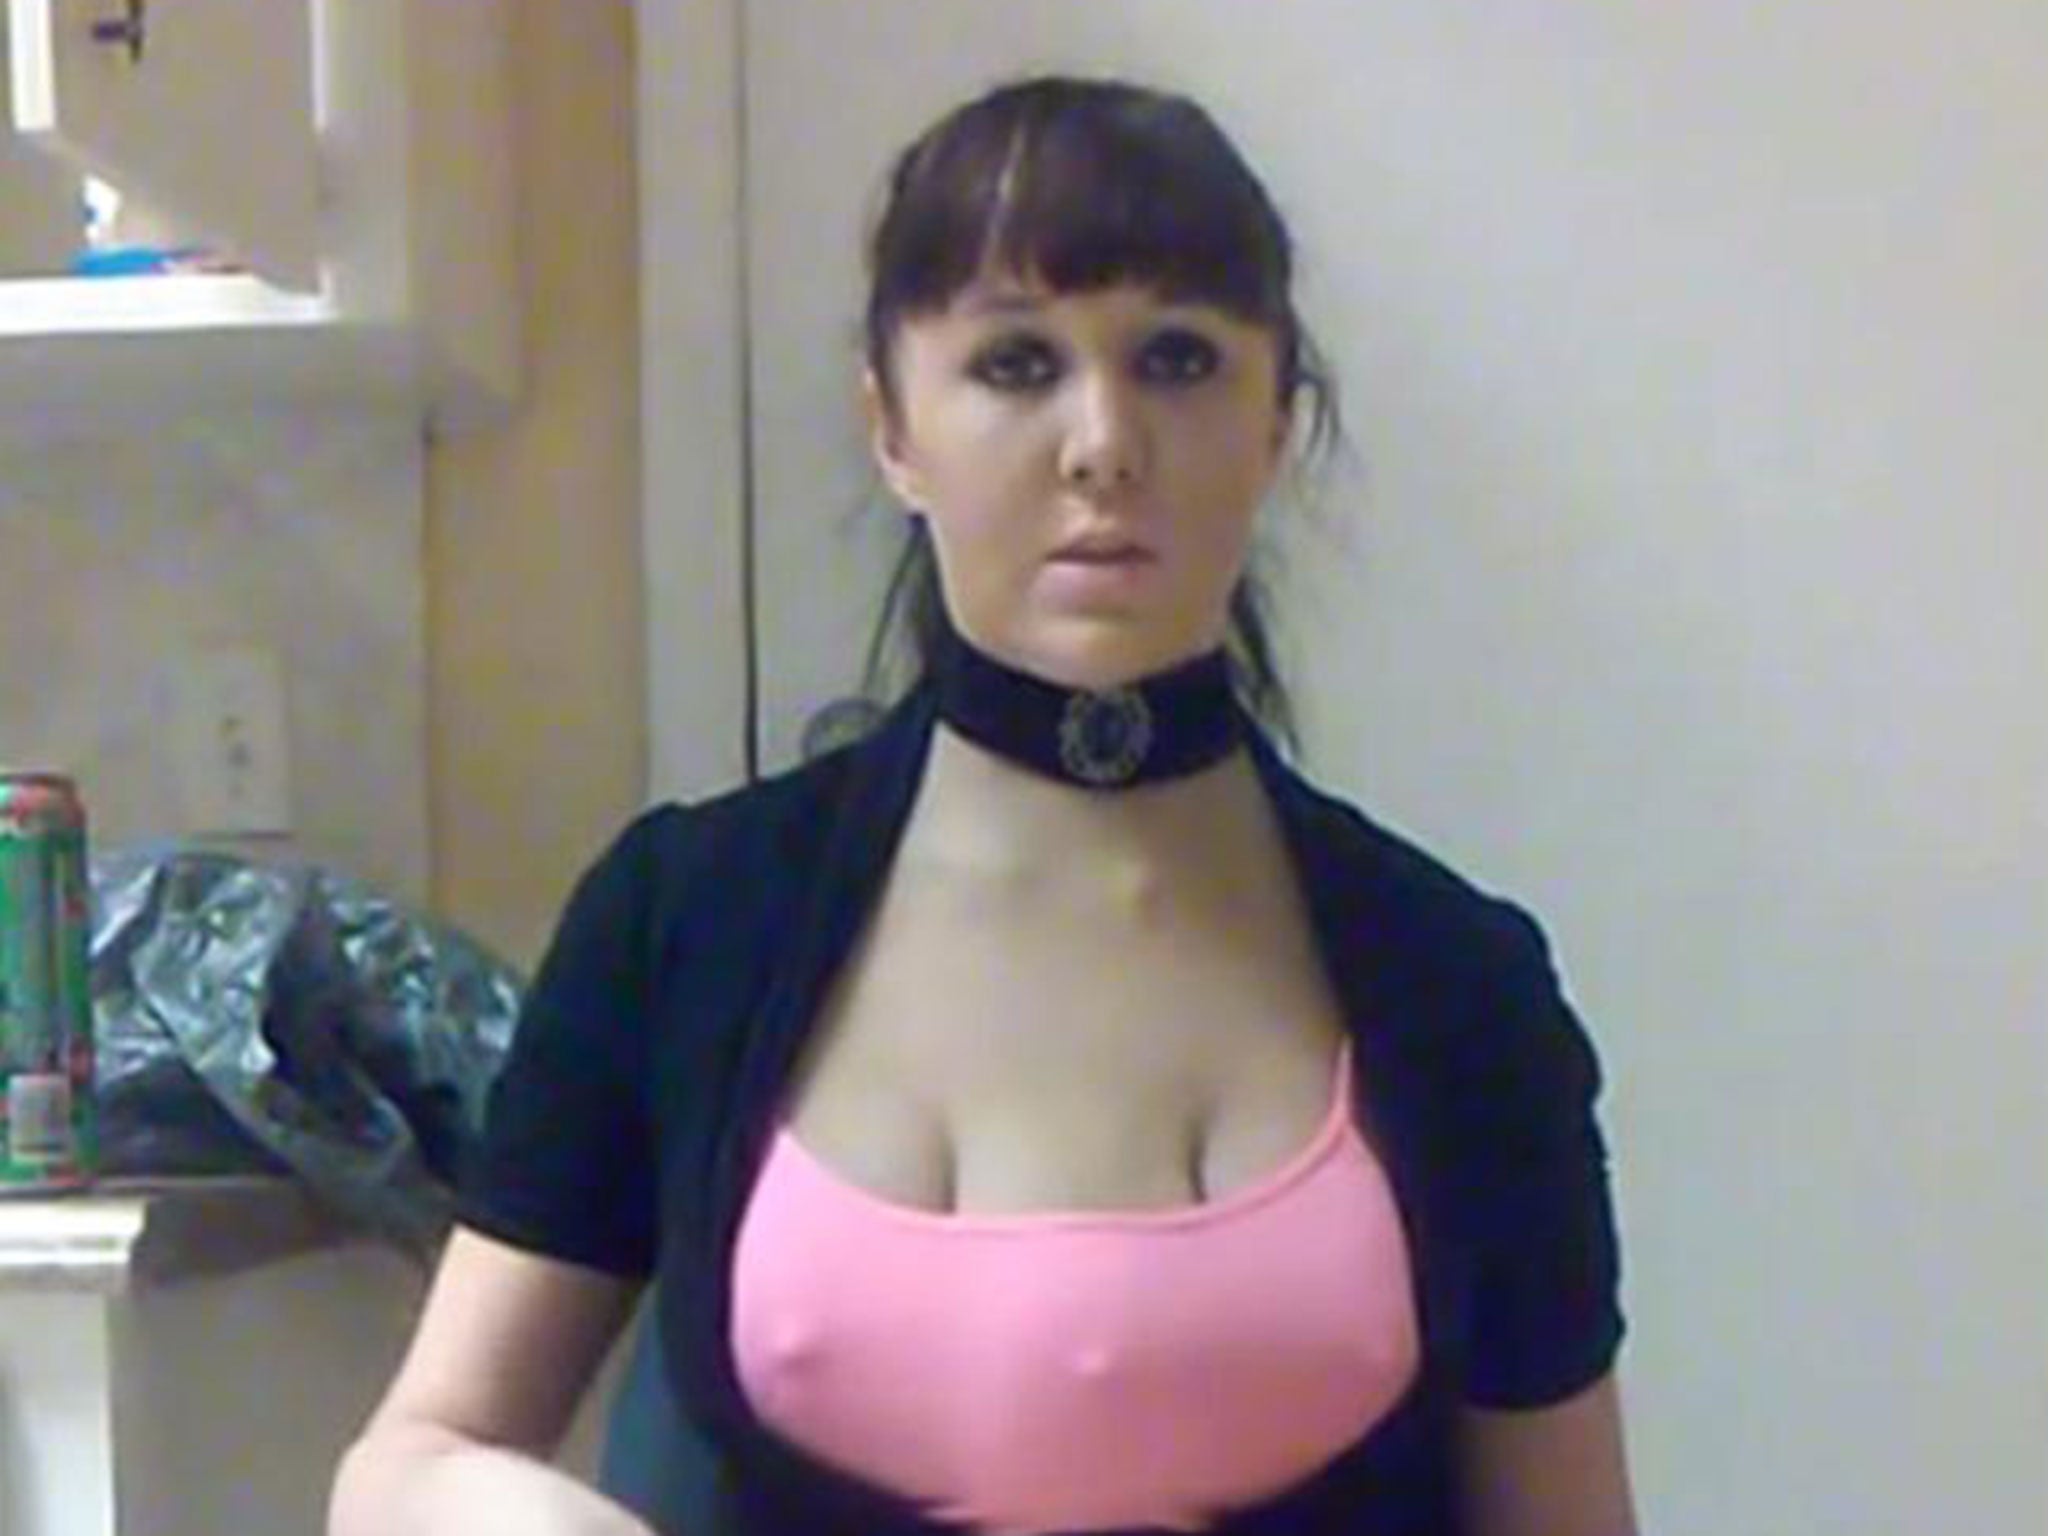 Three-breasted' woman Jasmine Tridevil insist her extra asset is NOT a hoax